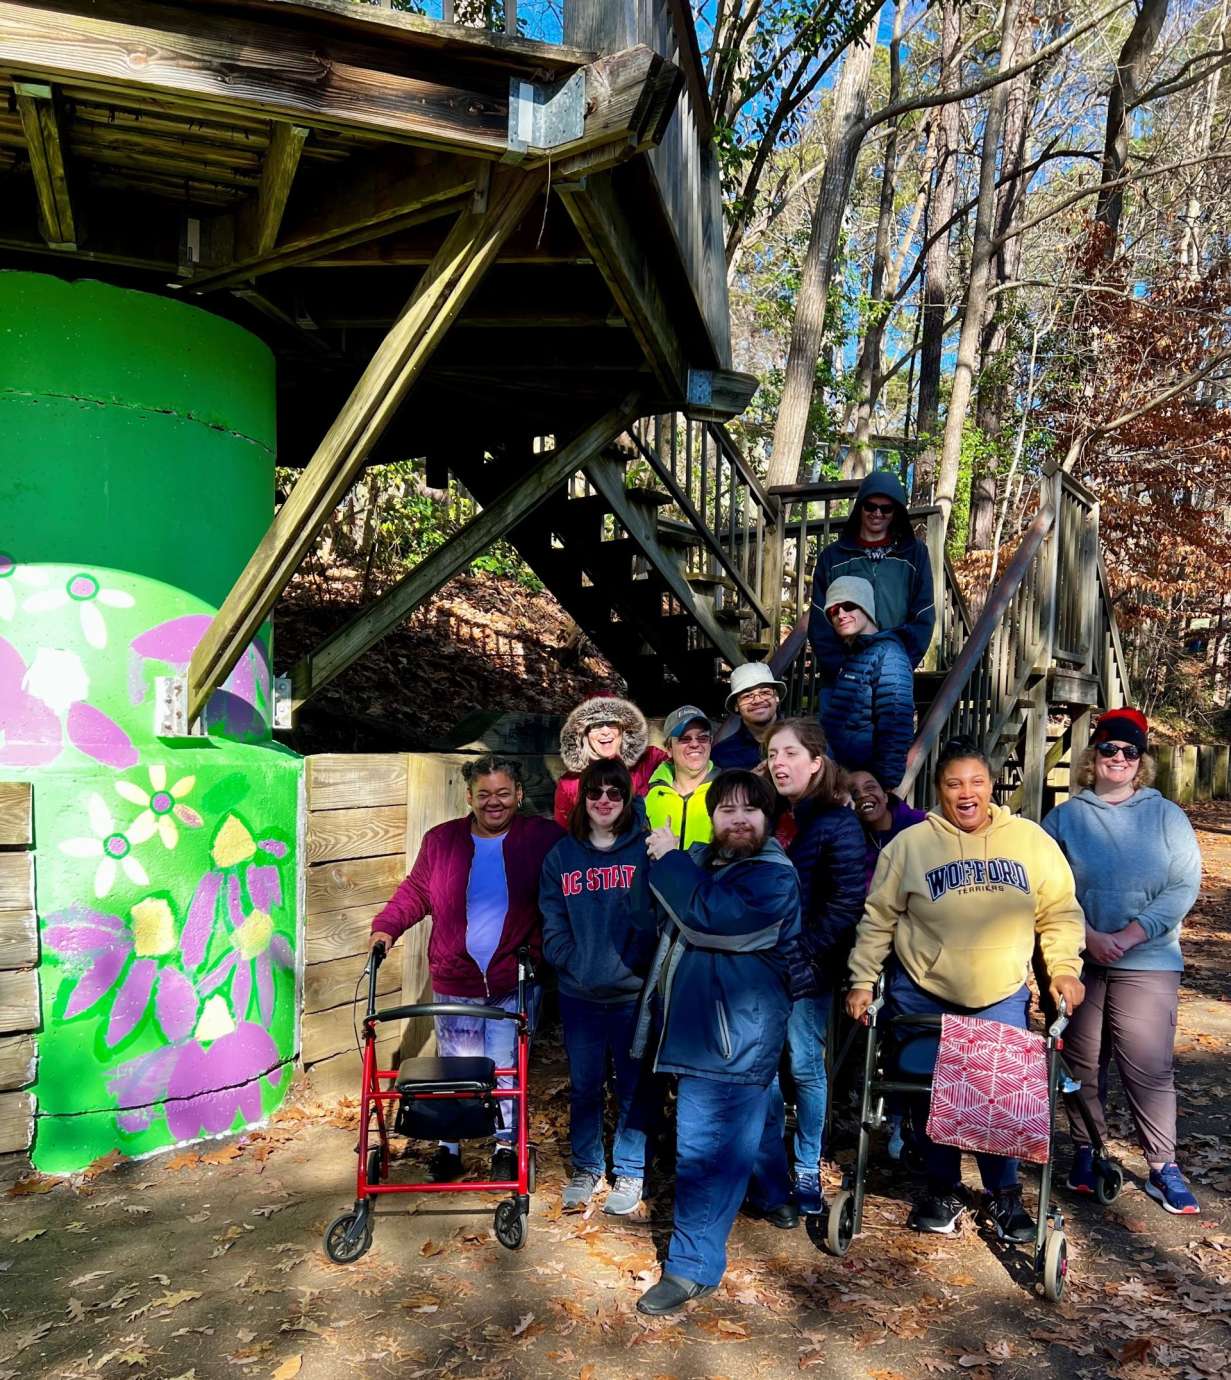 A group of smiling people outside on a trail excited to have just finished painting a mural